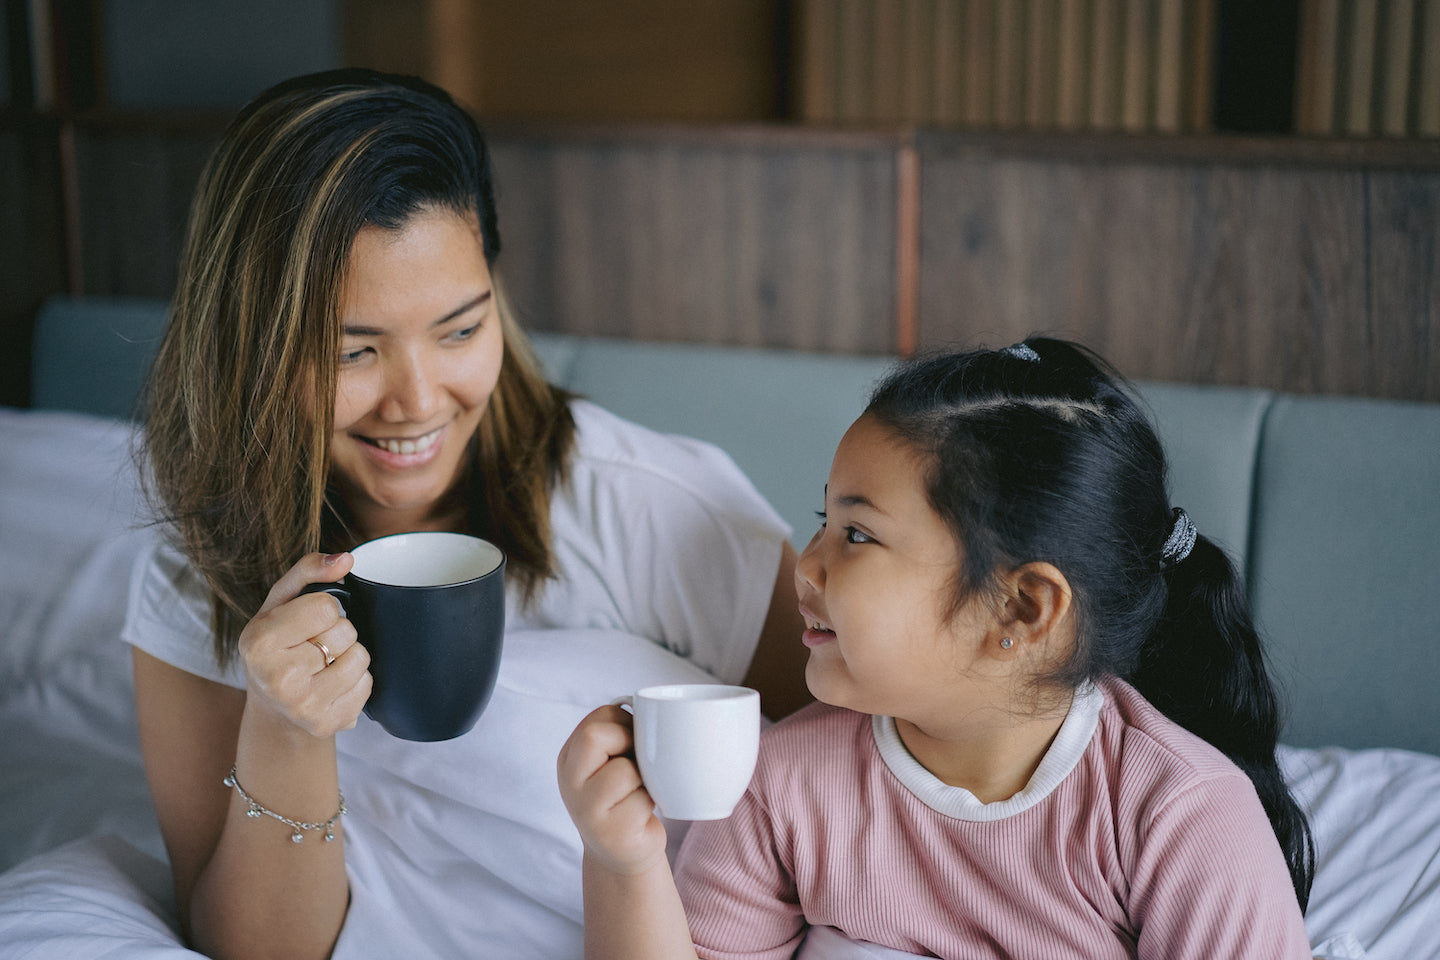 A mother in a white T-shirt holding a black mug sitting with her daughter on a bed. They're looking at each other and smiling, as if mid-conversation.